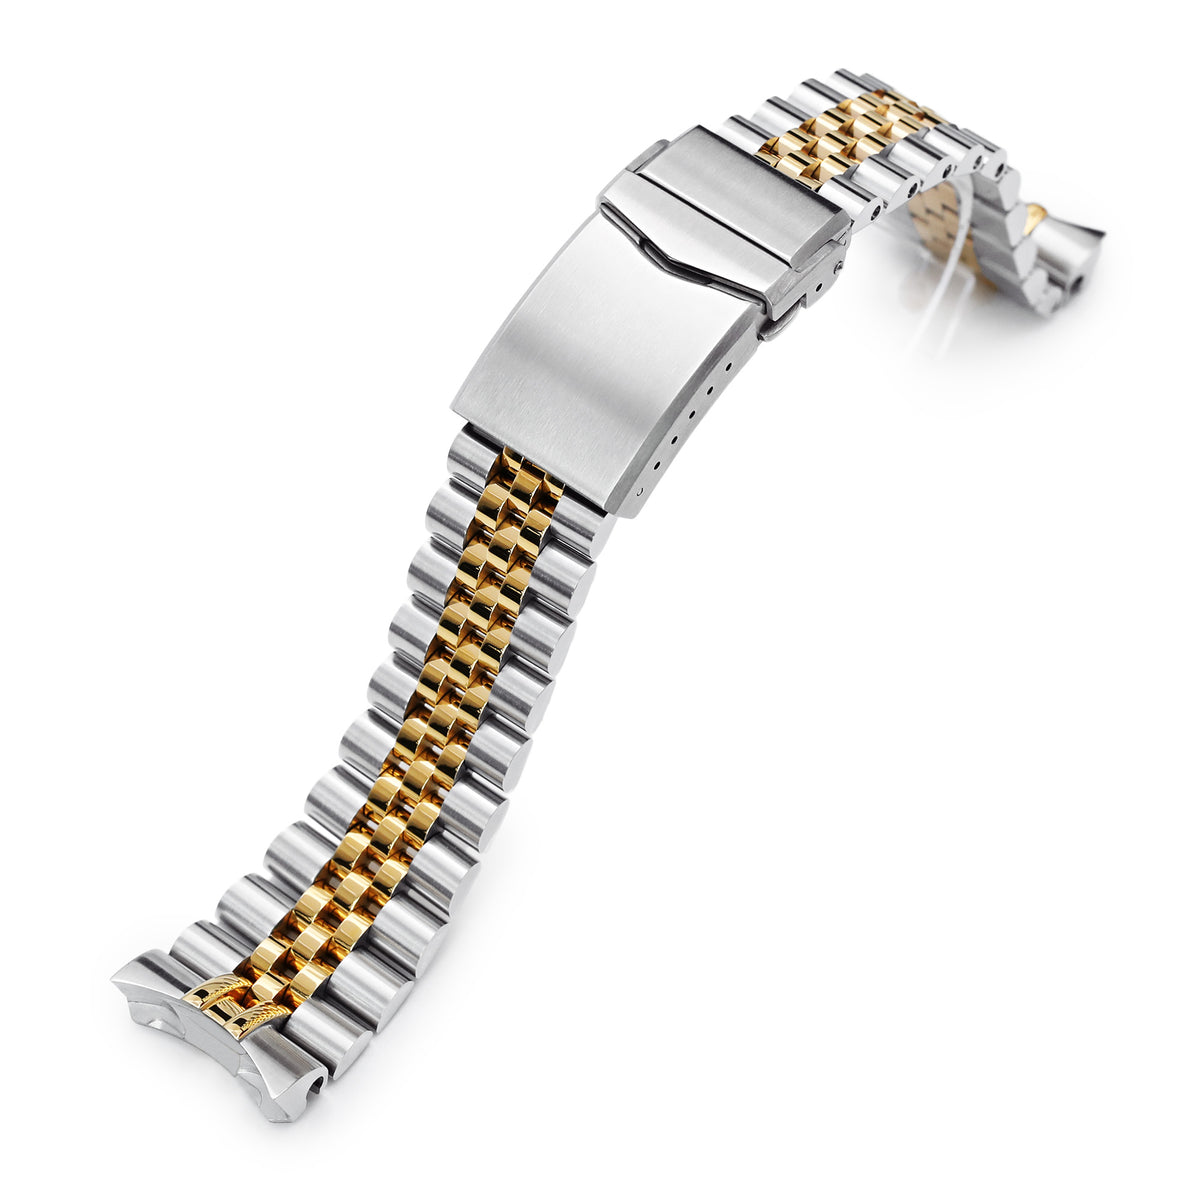 22mm Super-J Louis 316L Stainless Steel Watch Band for Seiko SKX007, Two Tone IP Gold V-Clasp Strapcode Watch Bands